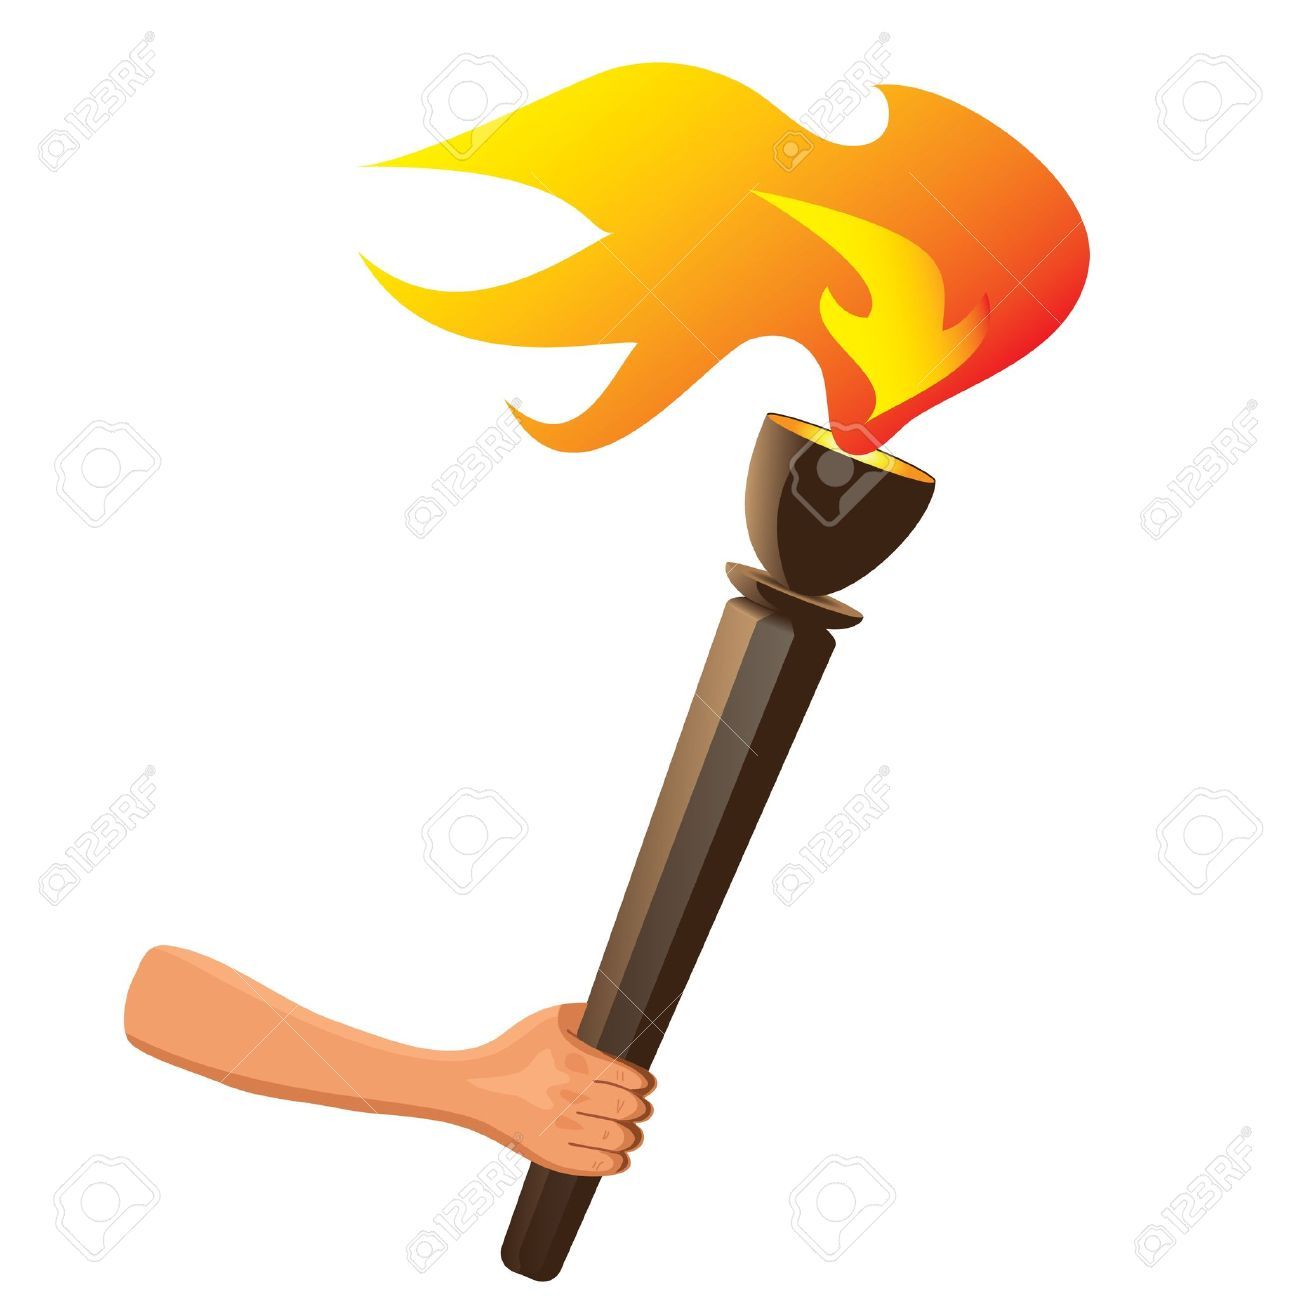 Sports torch clipart.